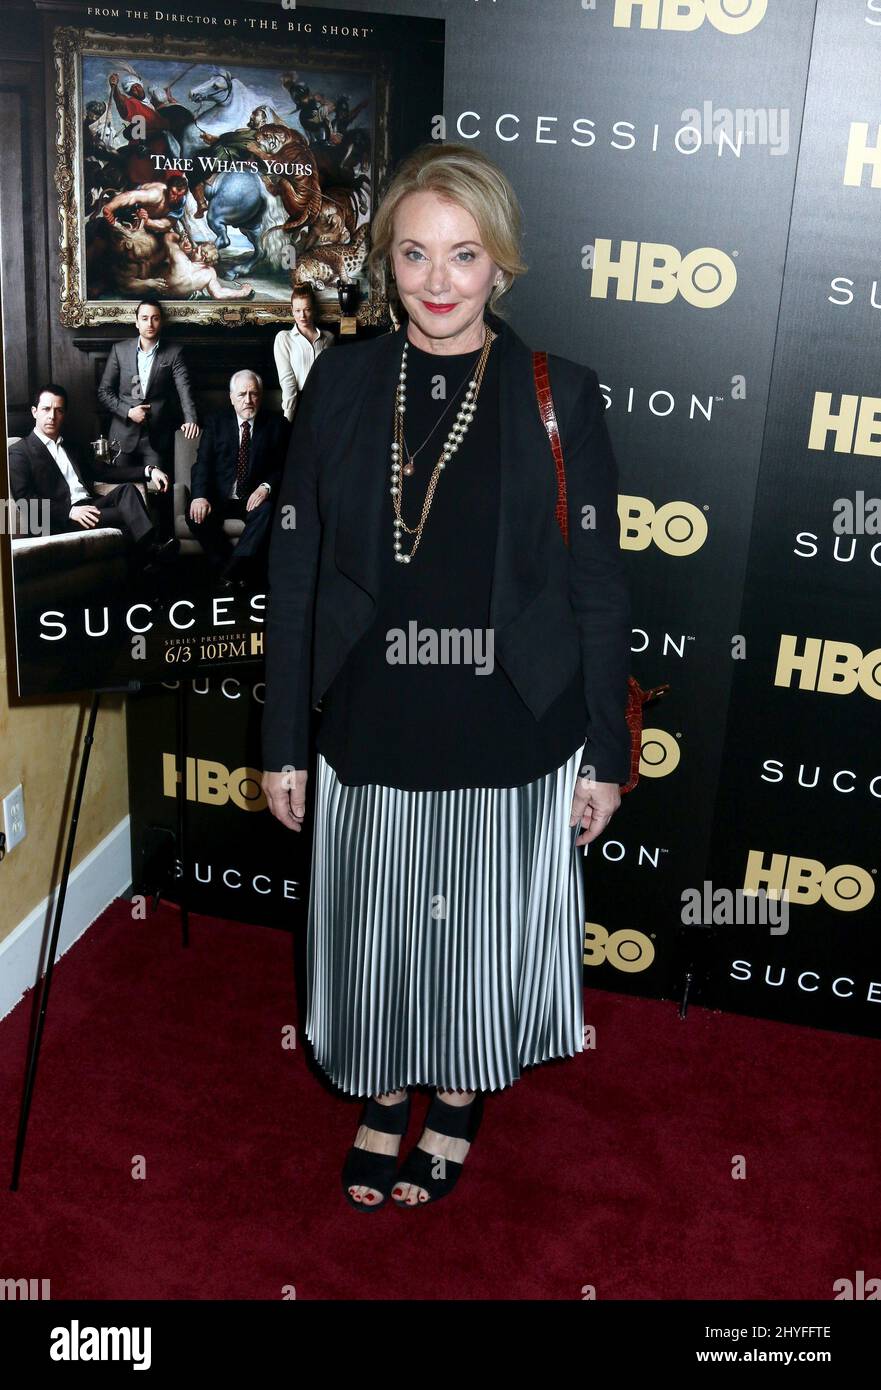 J. Smith-Cameron attending HBO's 'Succession' Premiere Held at the Time Warner Center on May 22, 2018. Stock Photo